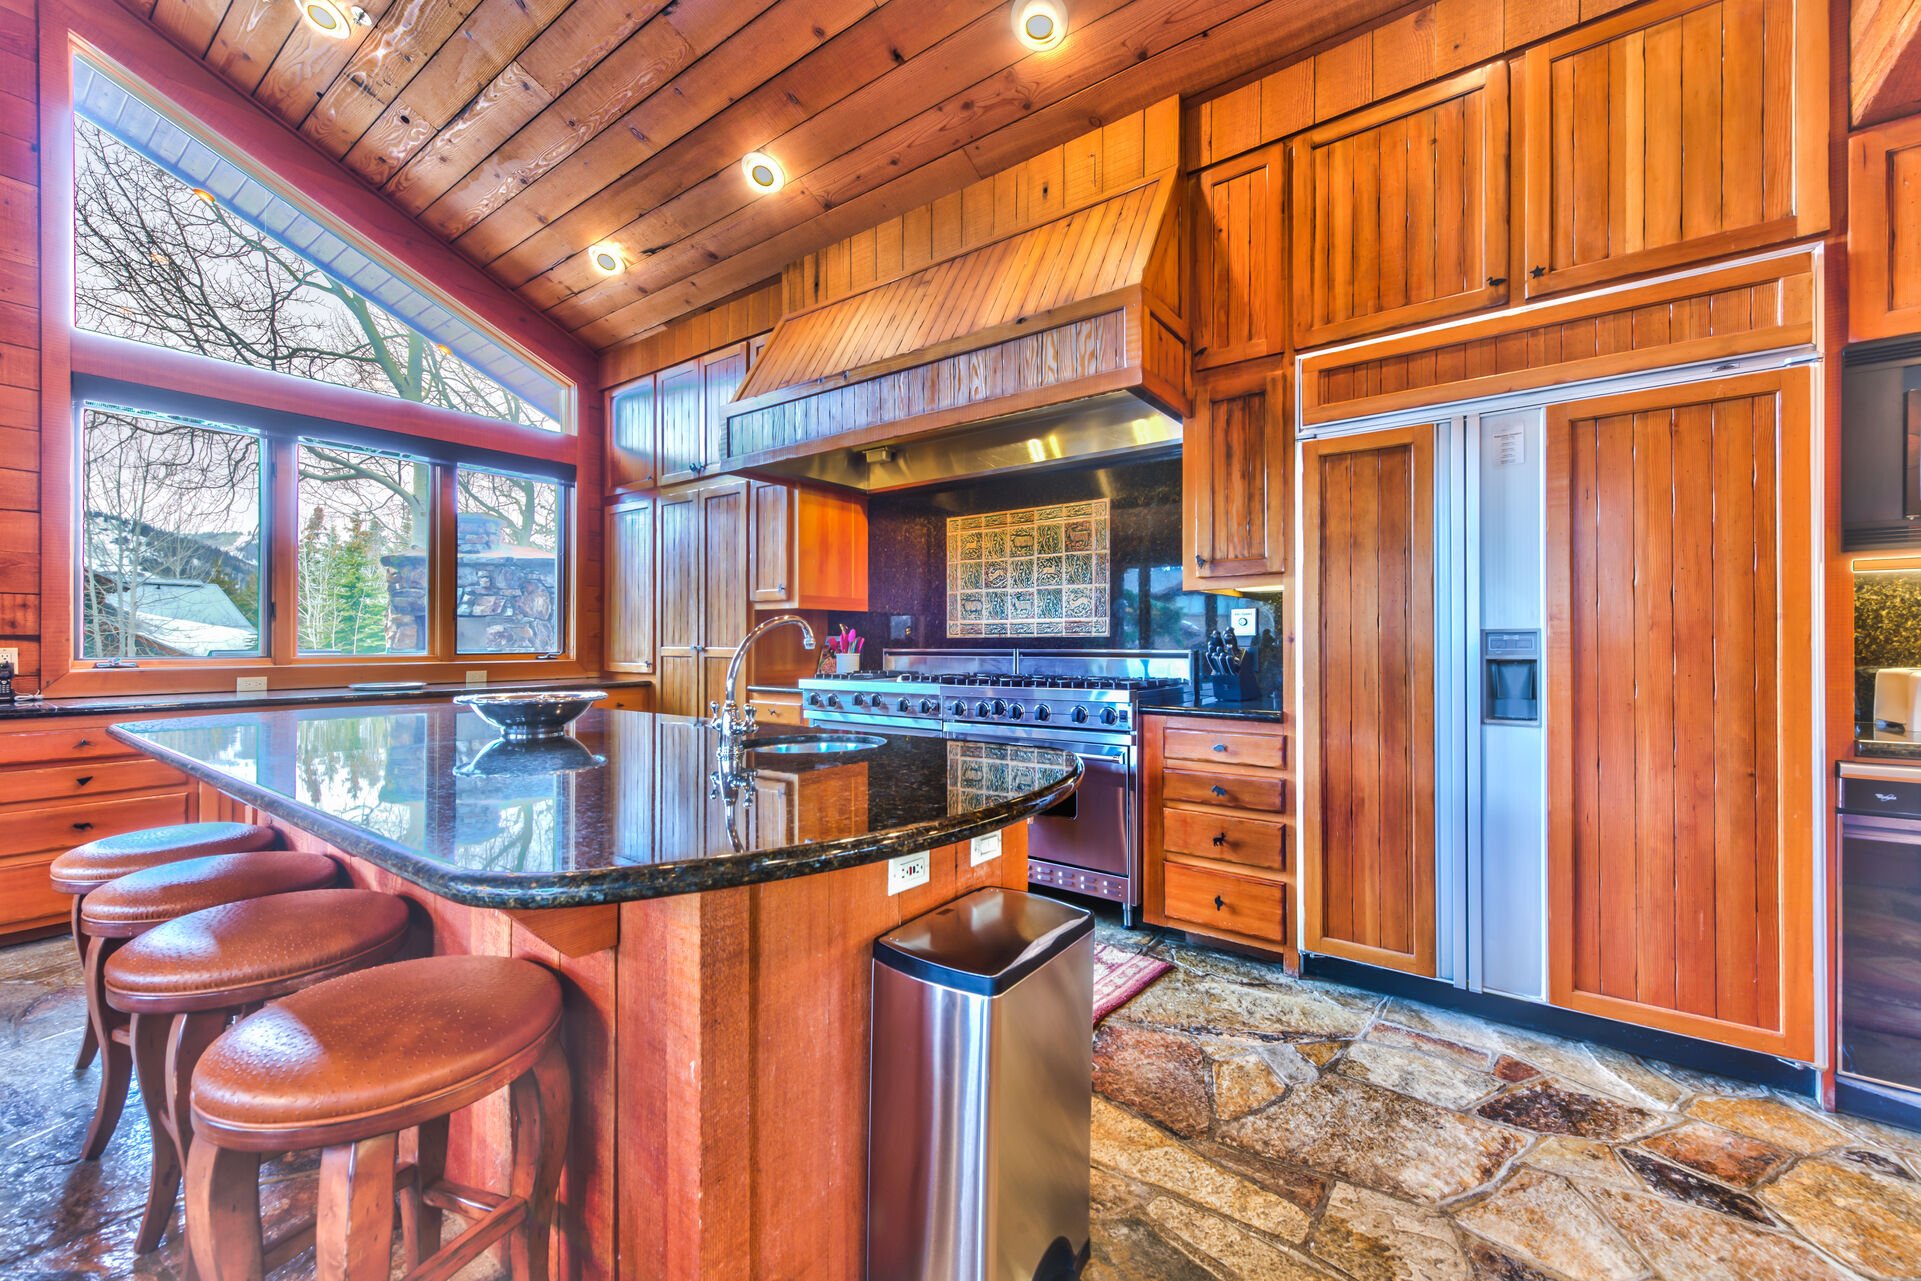 Fully Equipped Chef's Kitchen with Viking Appliances, Granite Countertops, and Bar Seating for 4